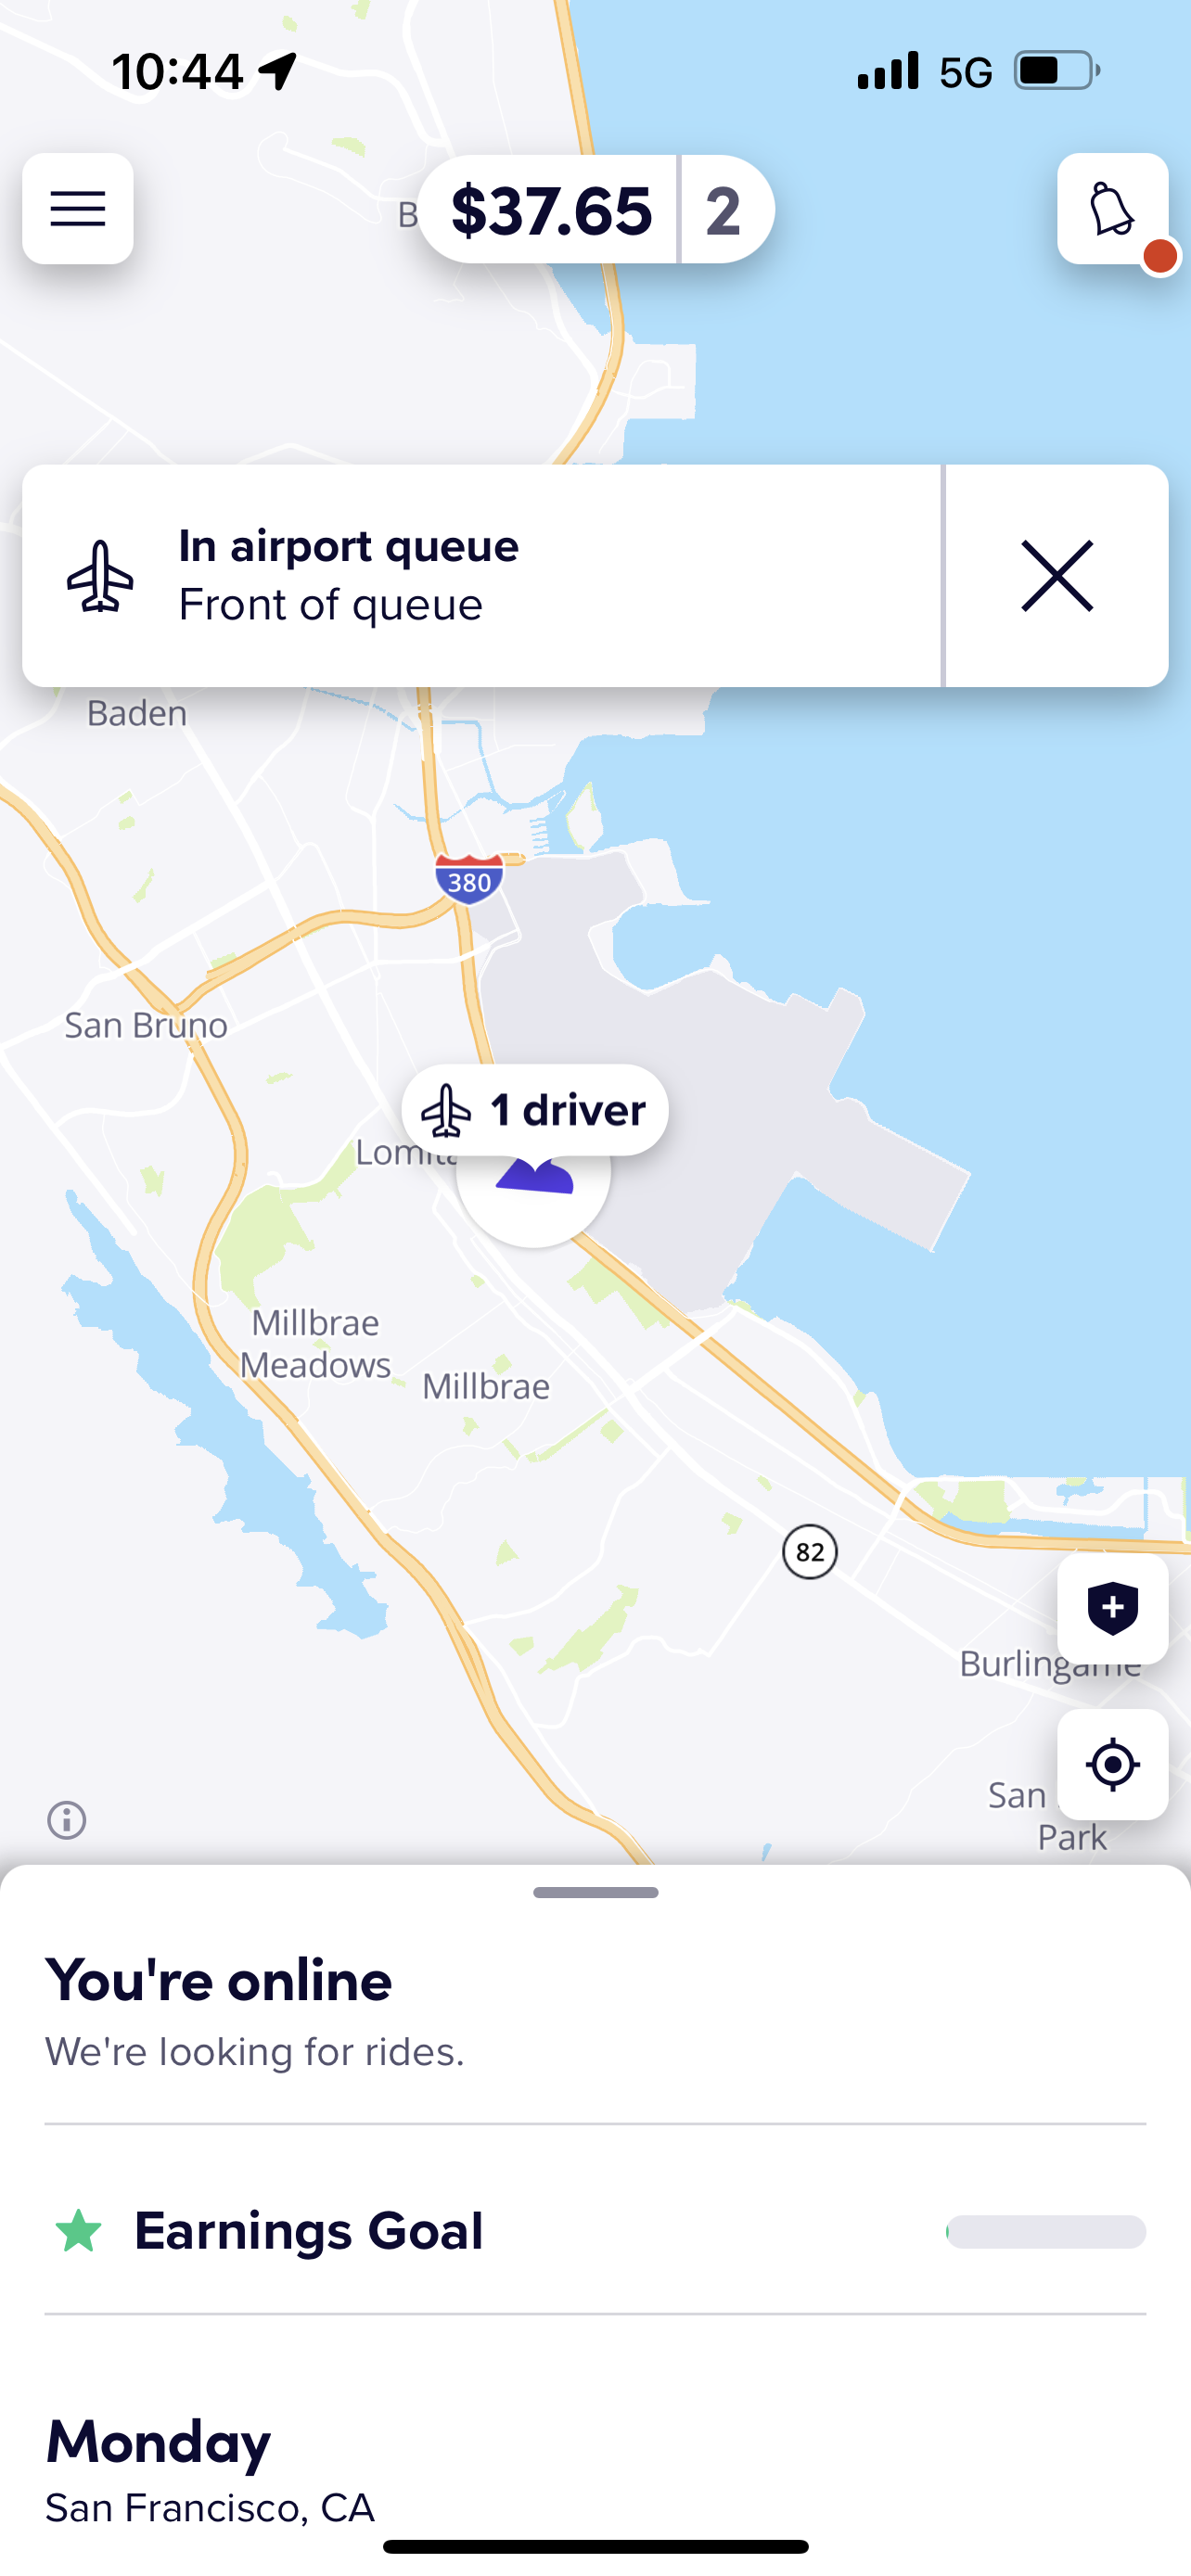 This is a screenshot of a driver's queue at the airport.